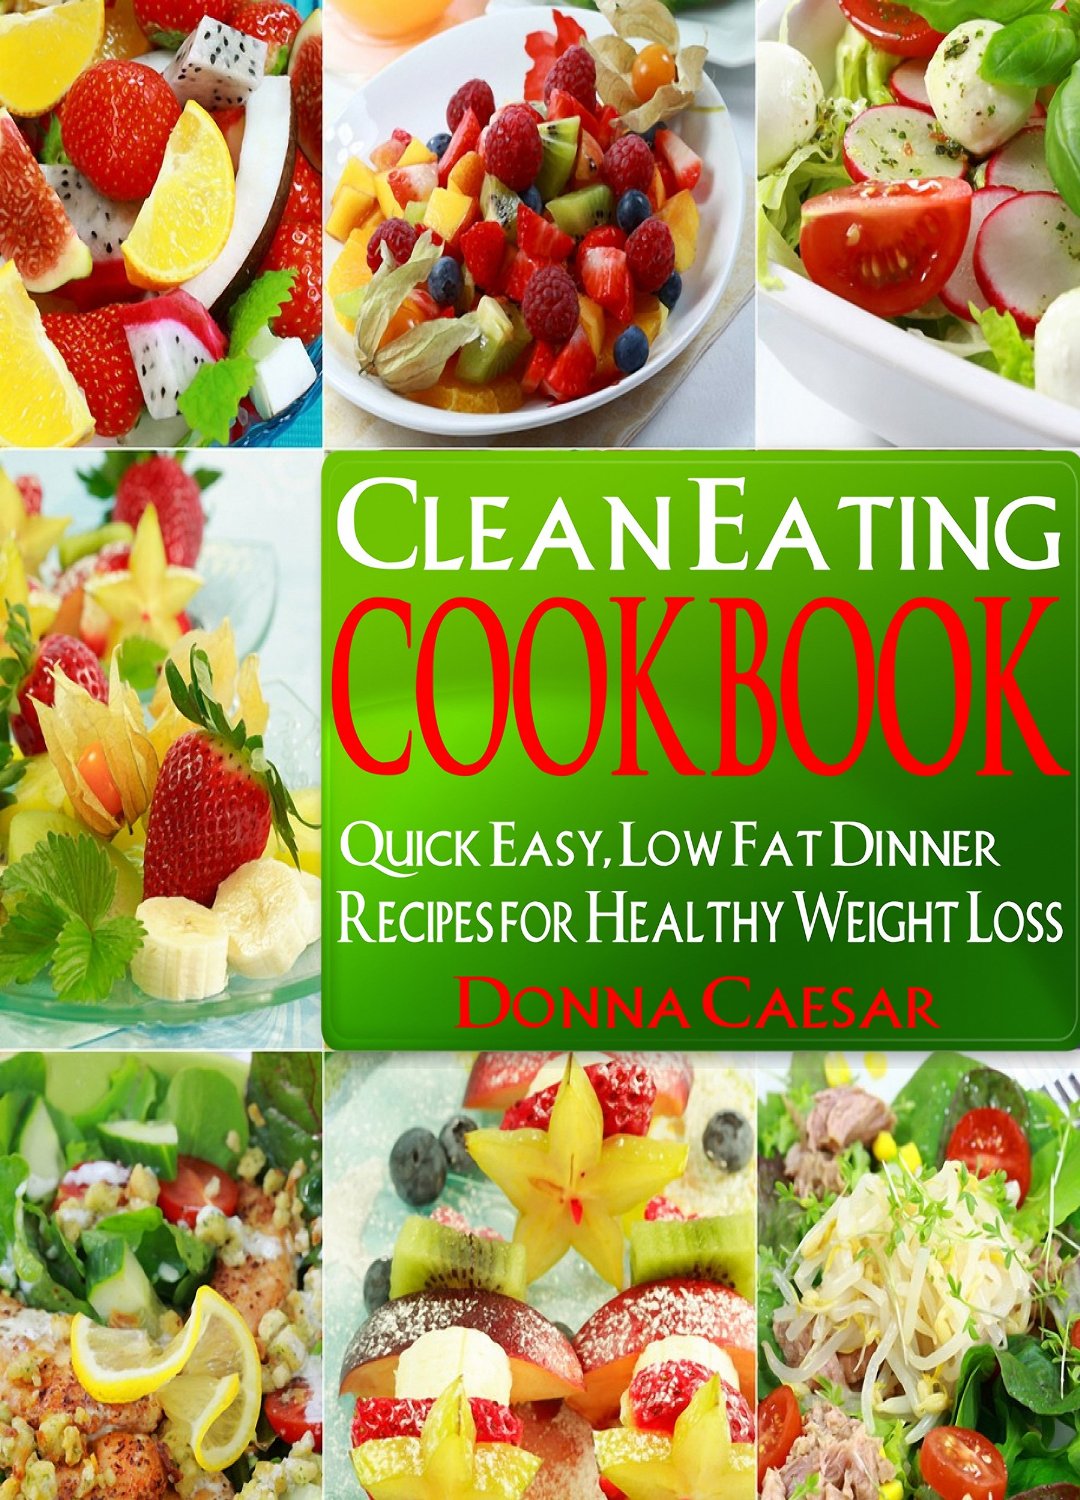 Clean Eating Cookbook by Donna Szczur